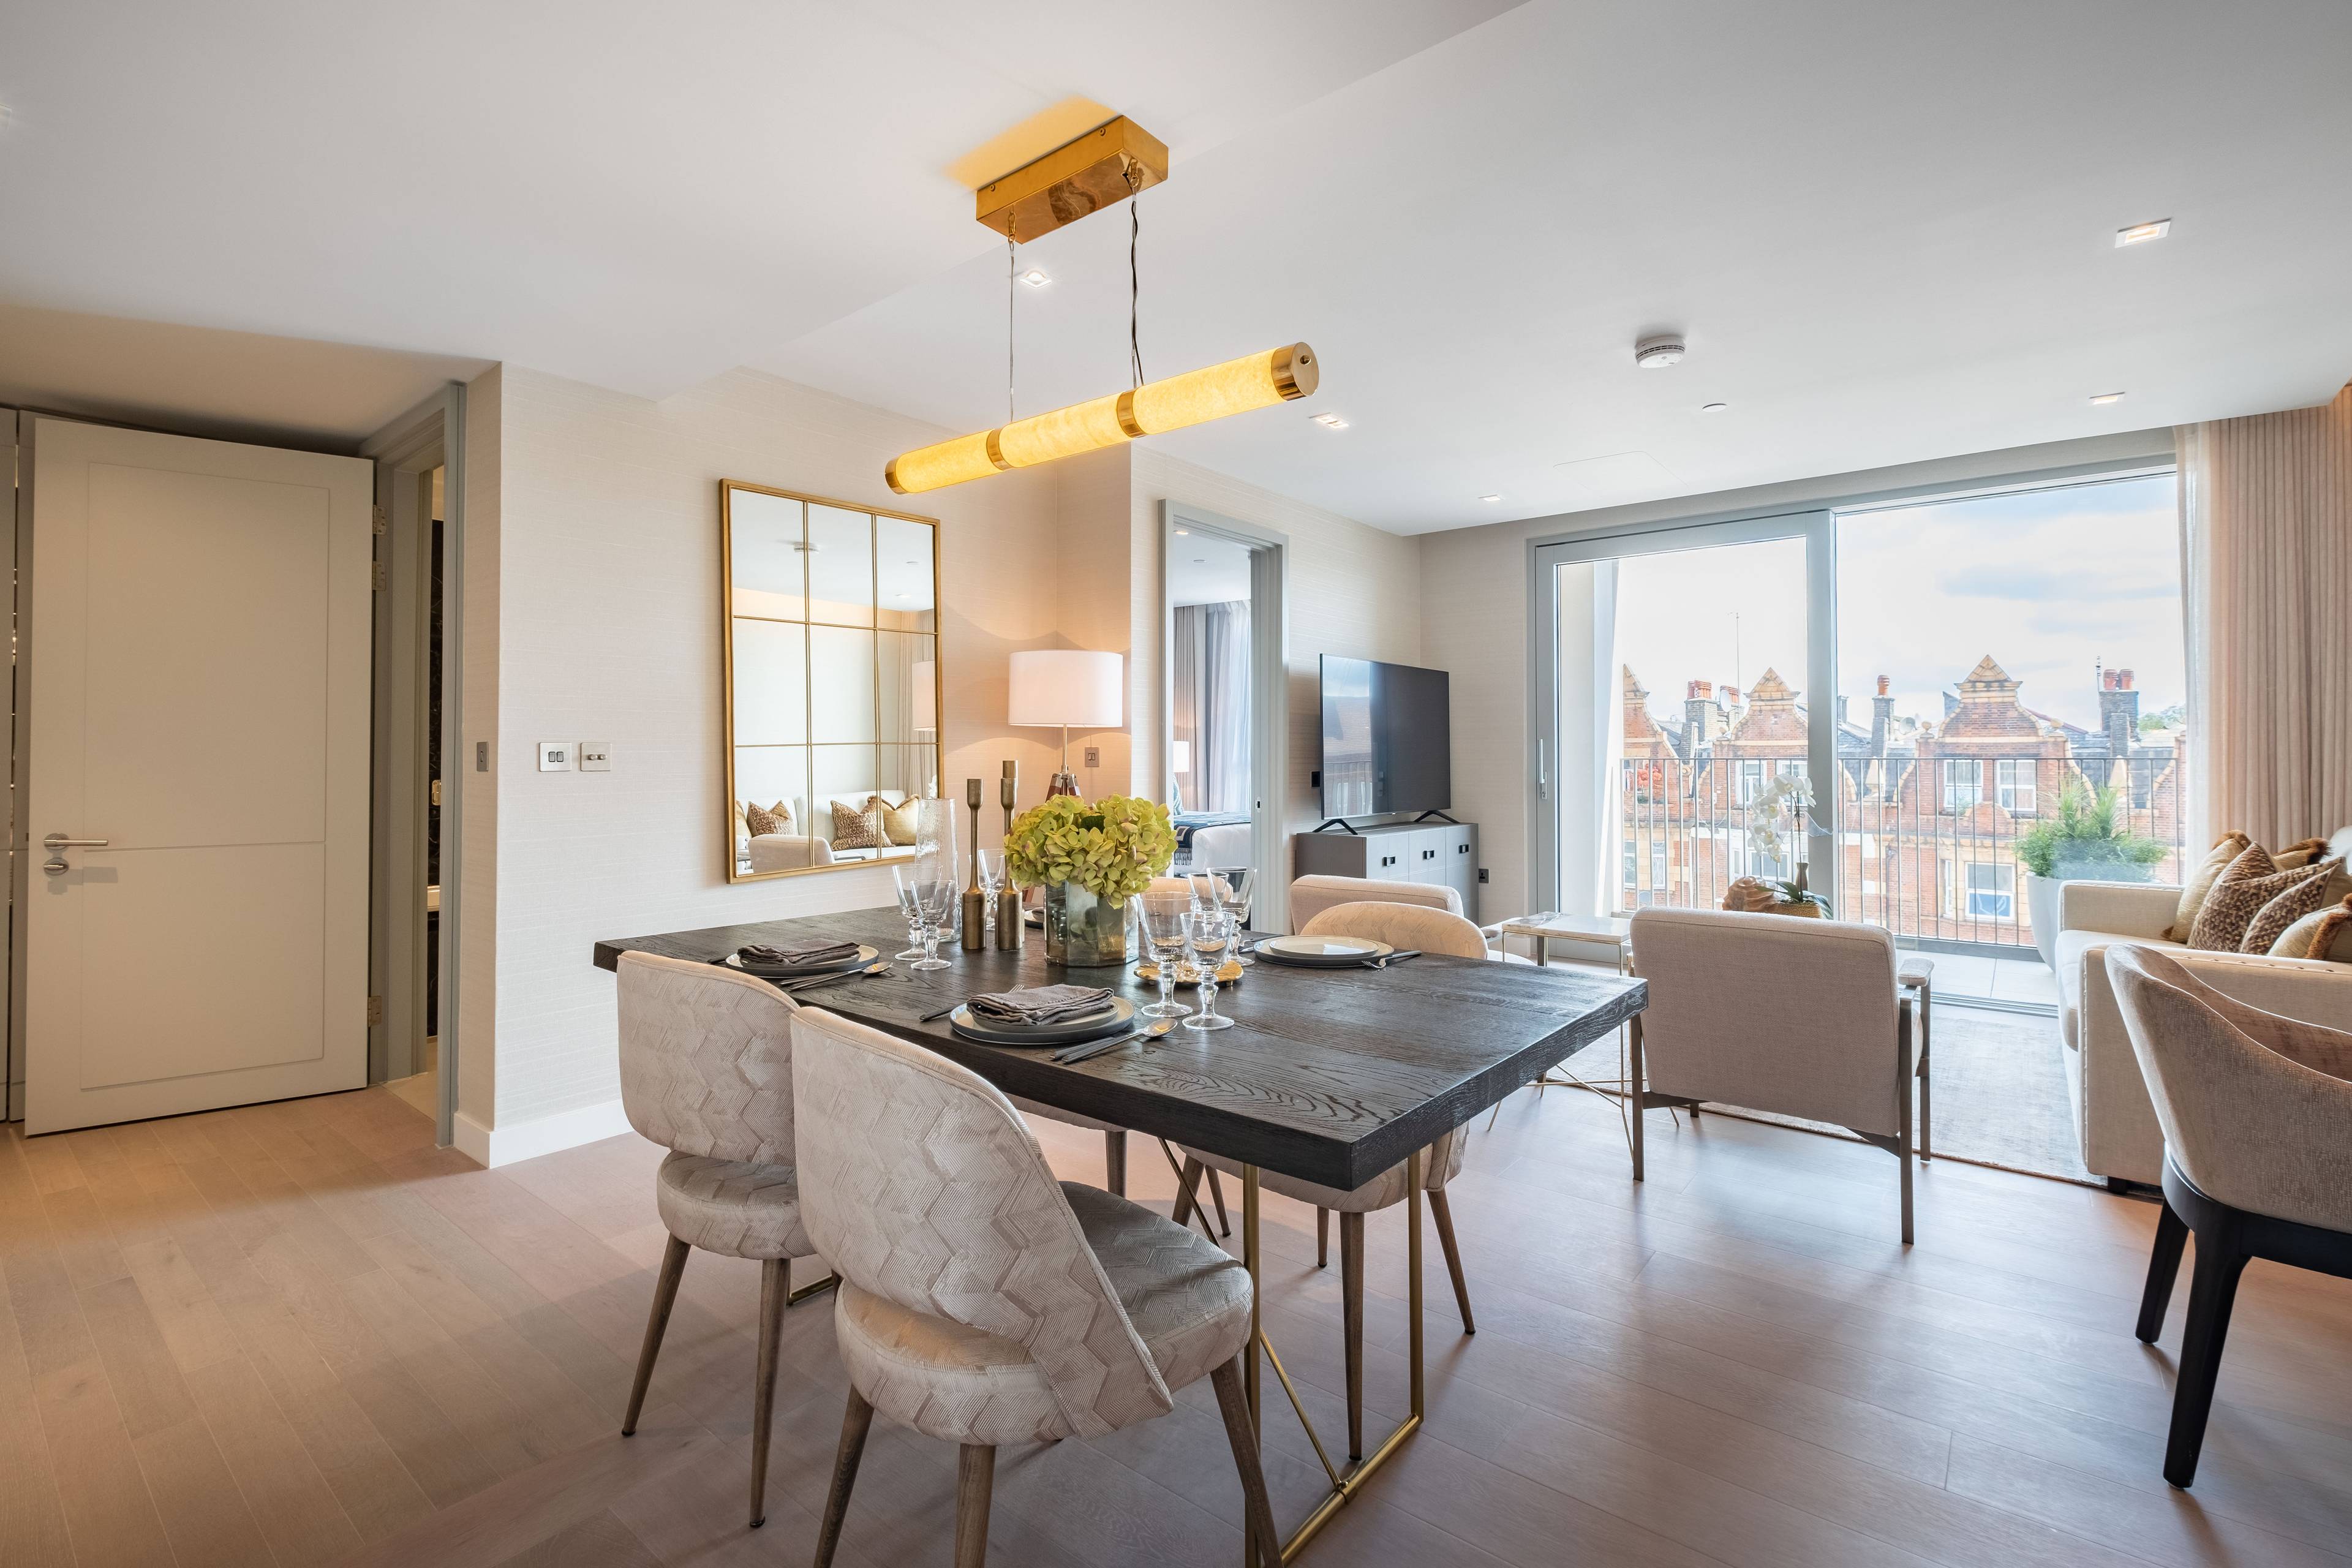 Modern one-bedroom apartment boasting top of the line amenities at newly built Garrett Mansions situated between fashionable Marylebone and Little Venice.